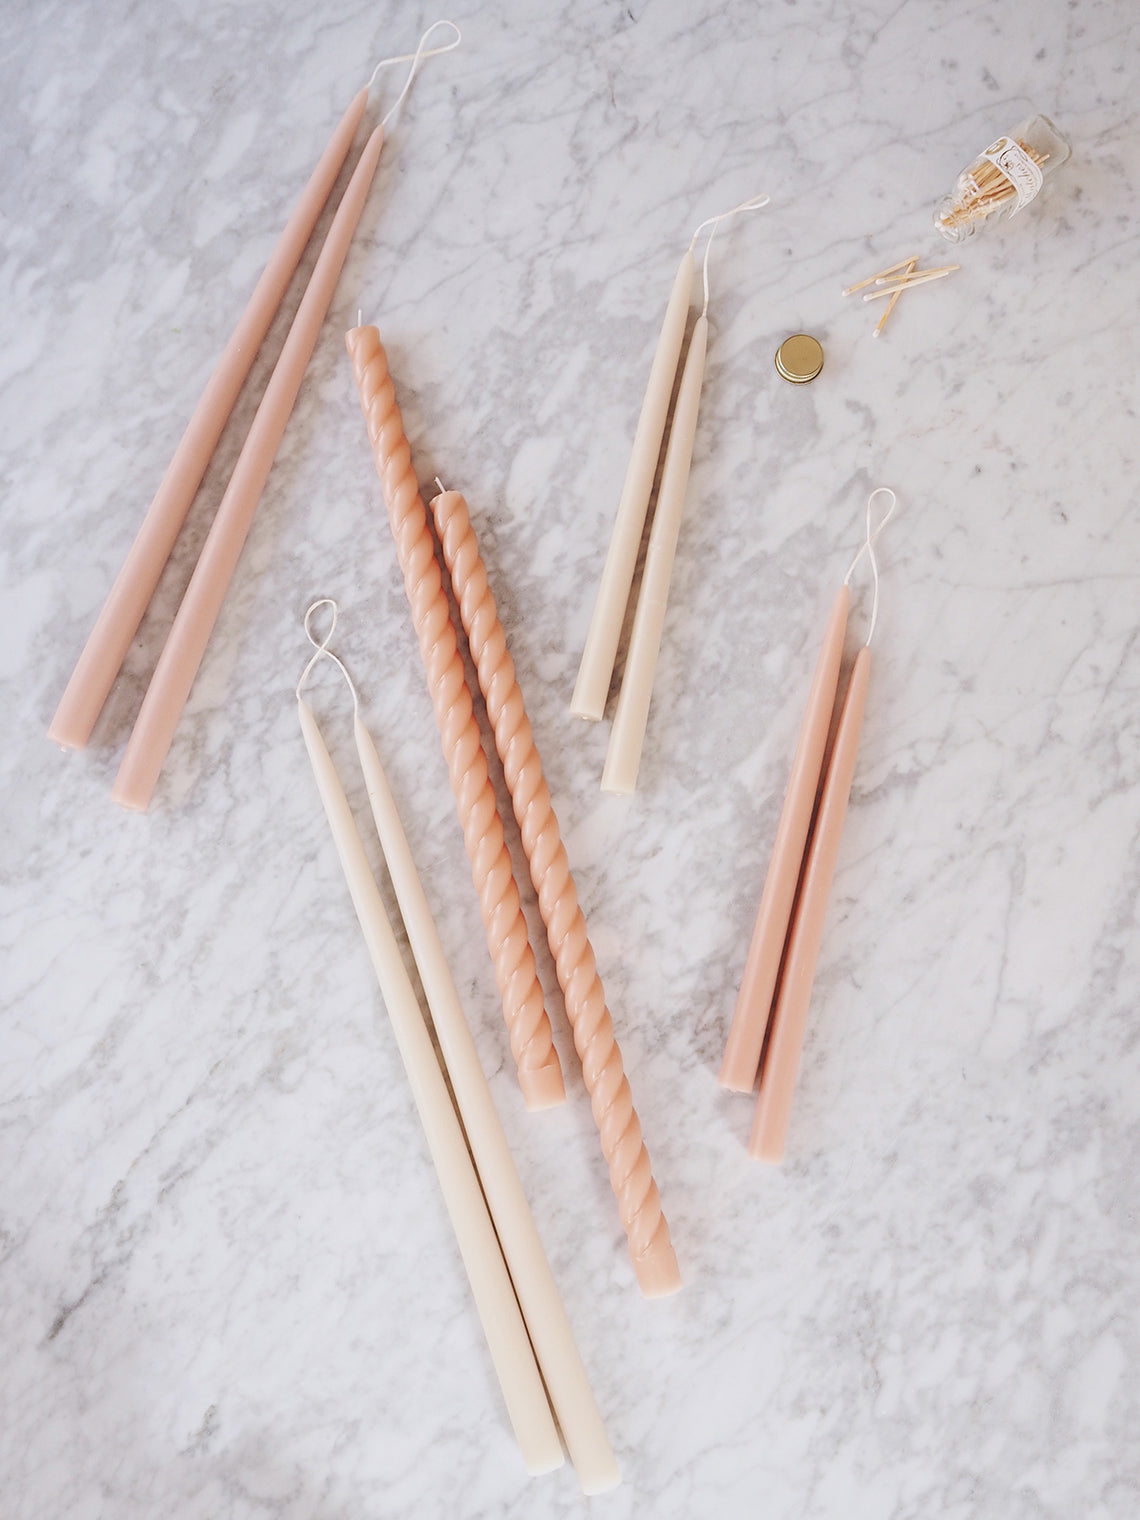 Classic Blush 18" Taper Candle Set of 2